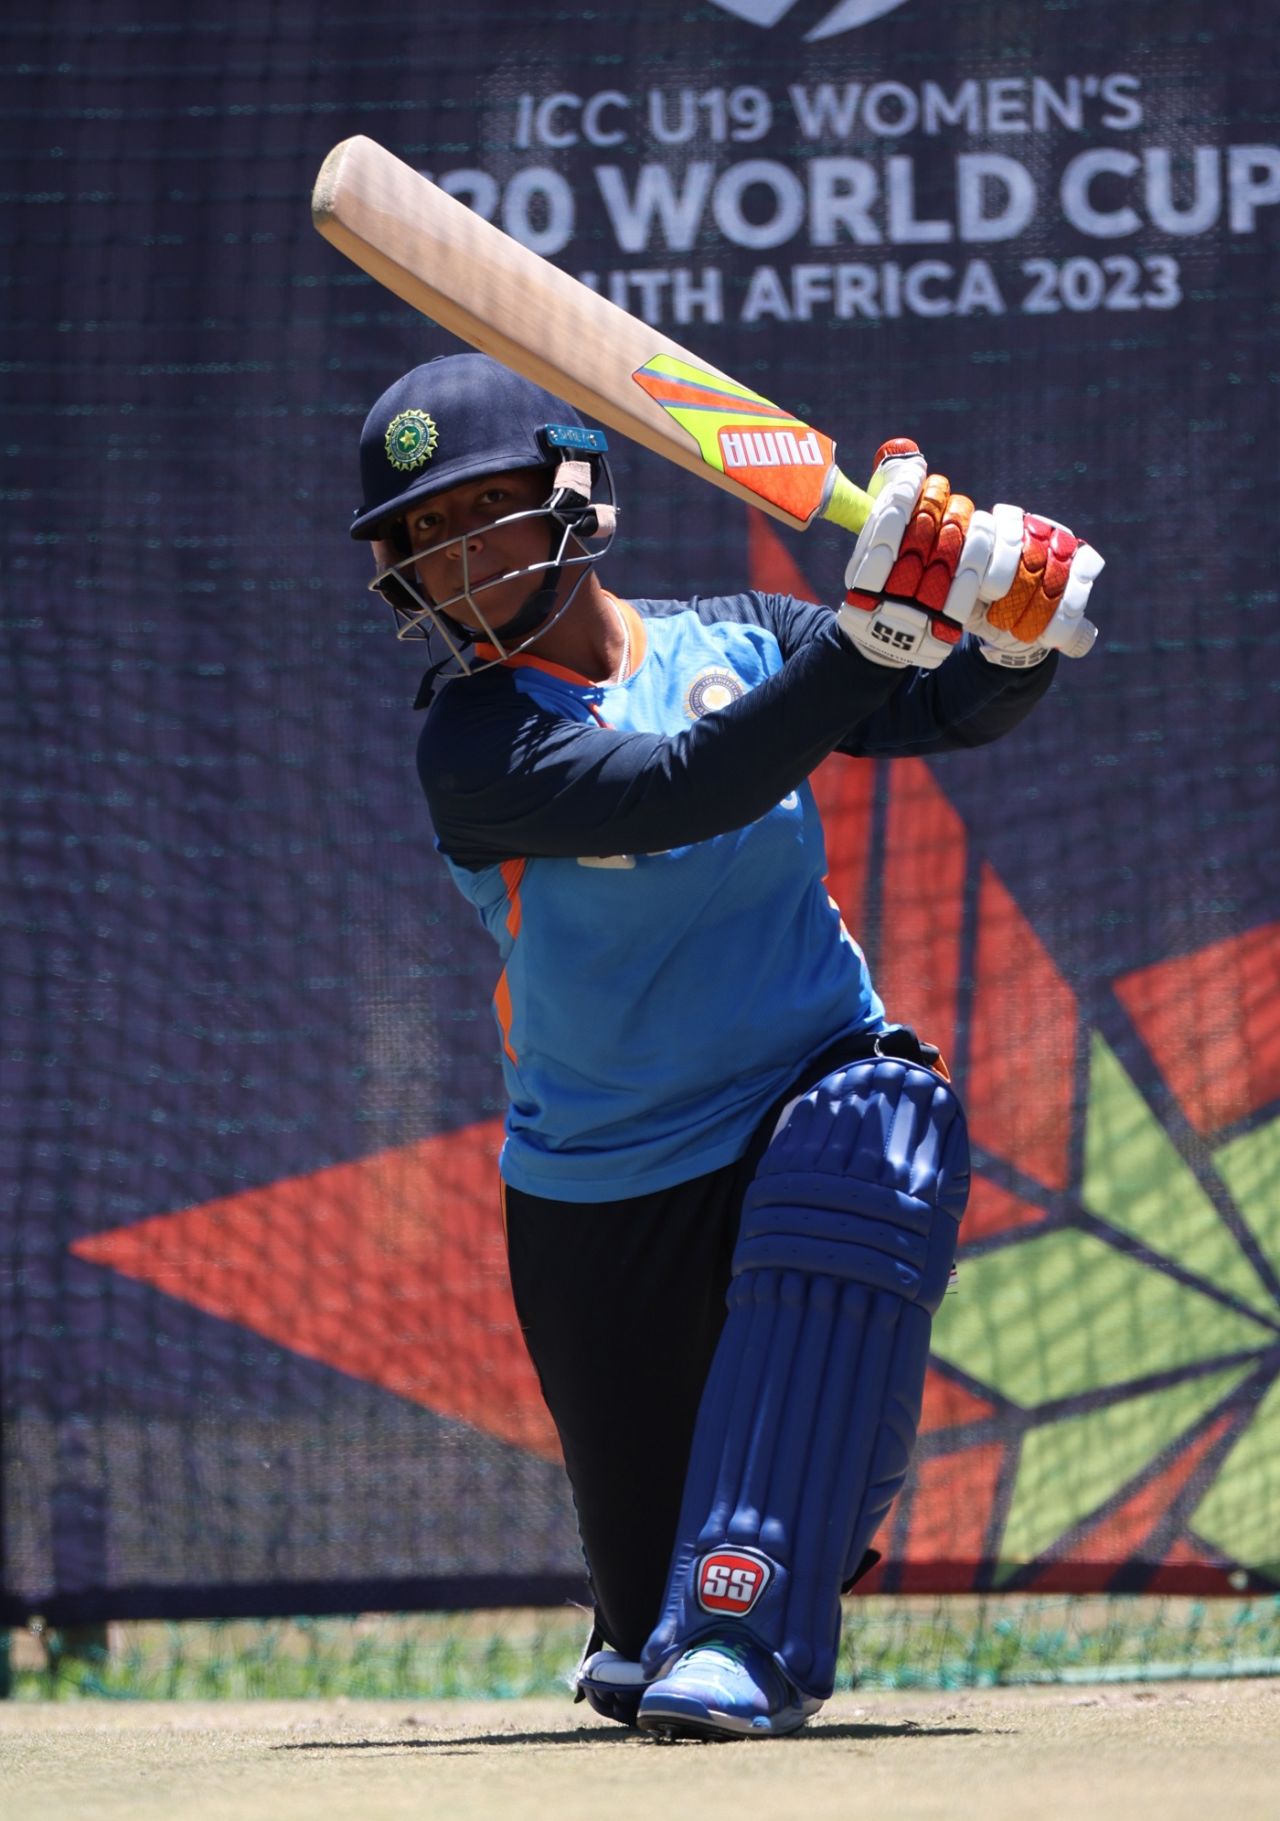 Richa Ghosh tonks one during practice, India vs England, Under-19 Women's T20 World Cup, Potchefstroom, January 28, 2023